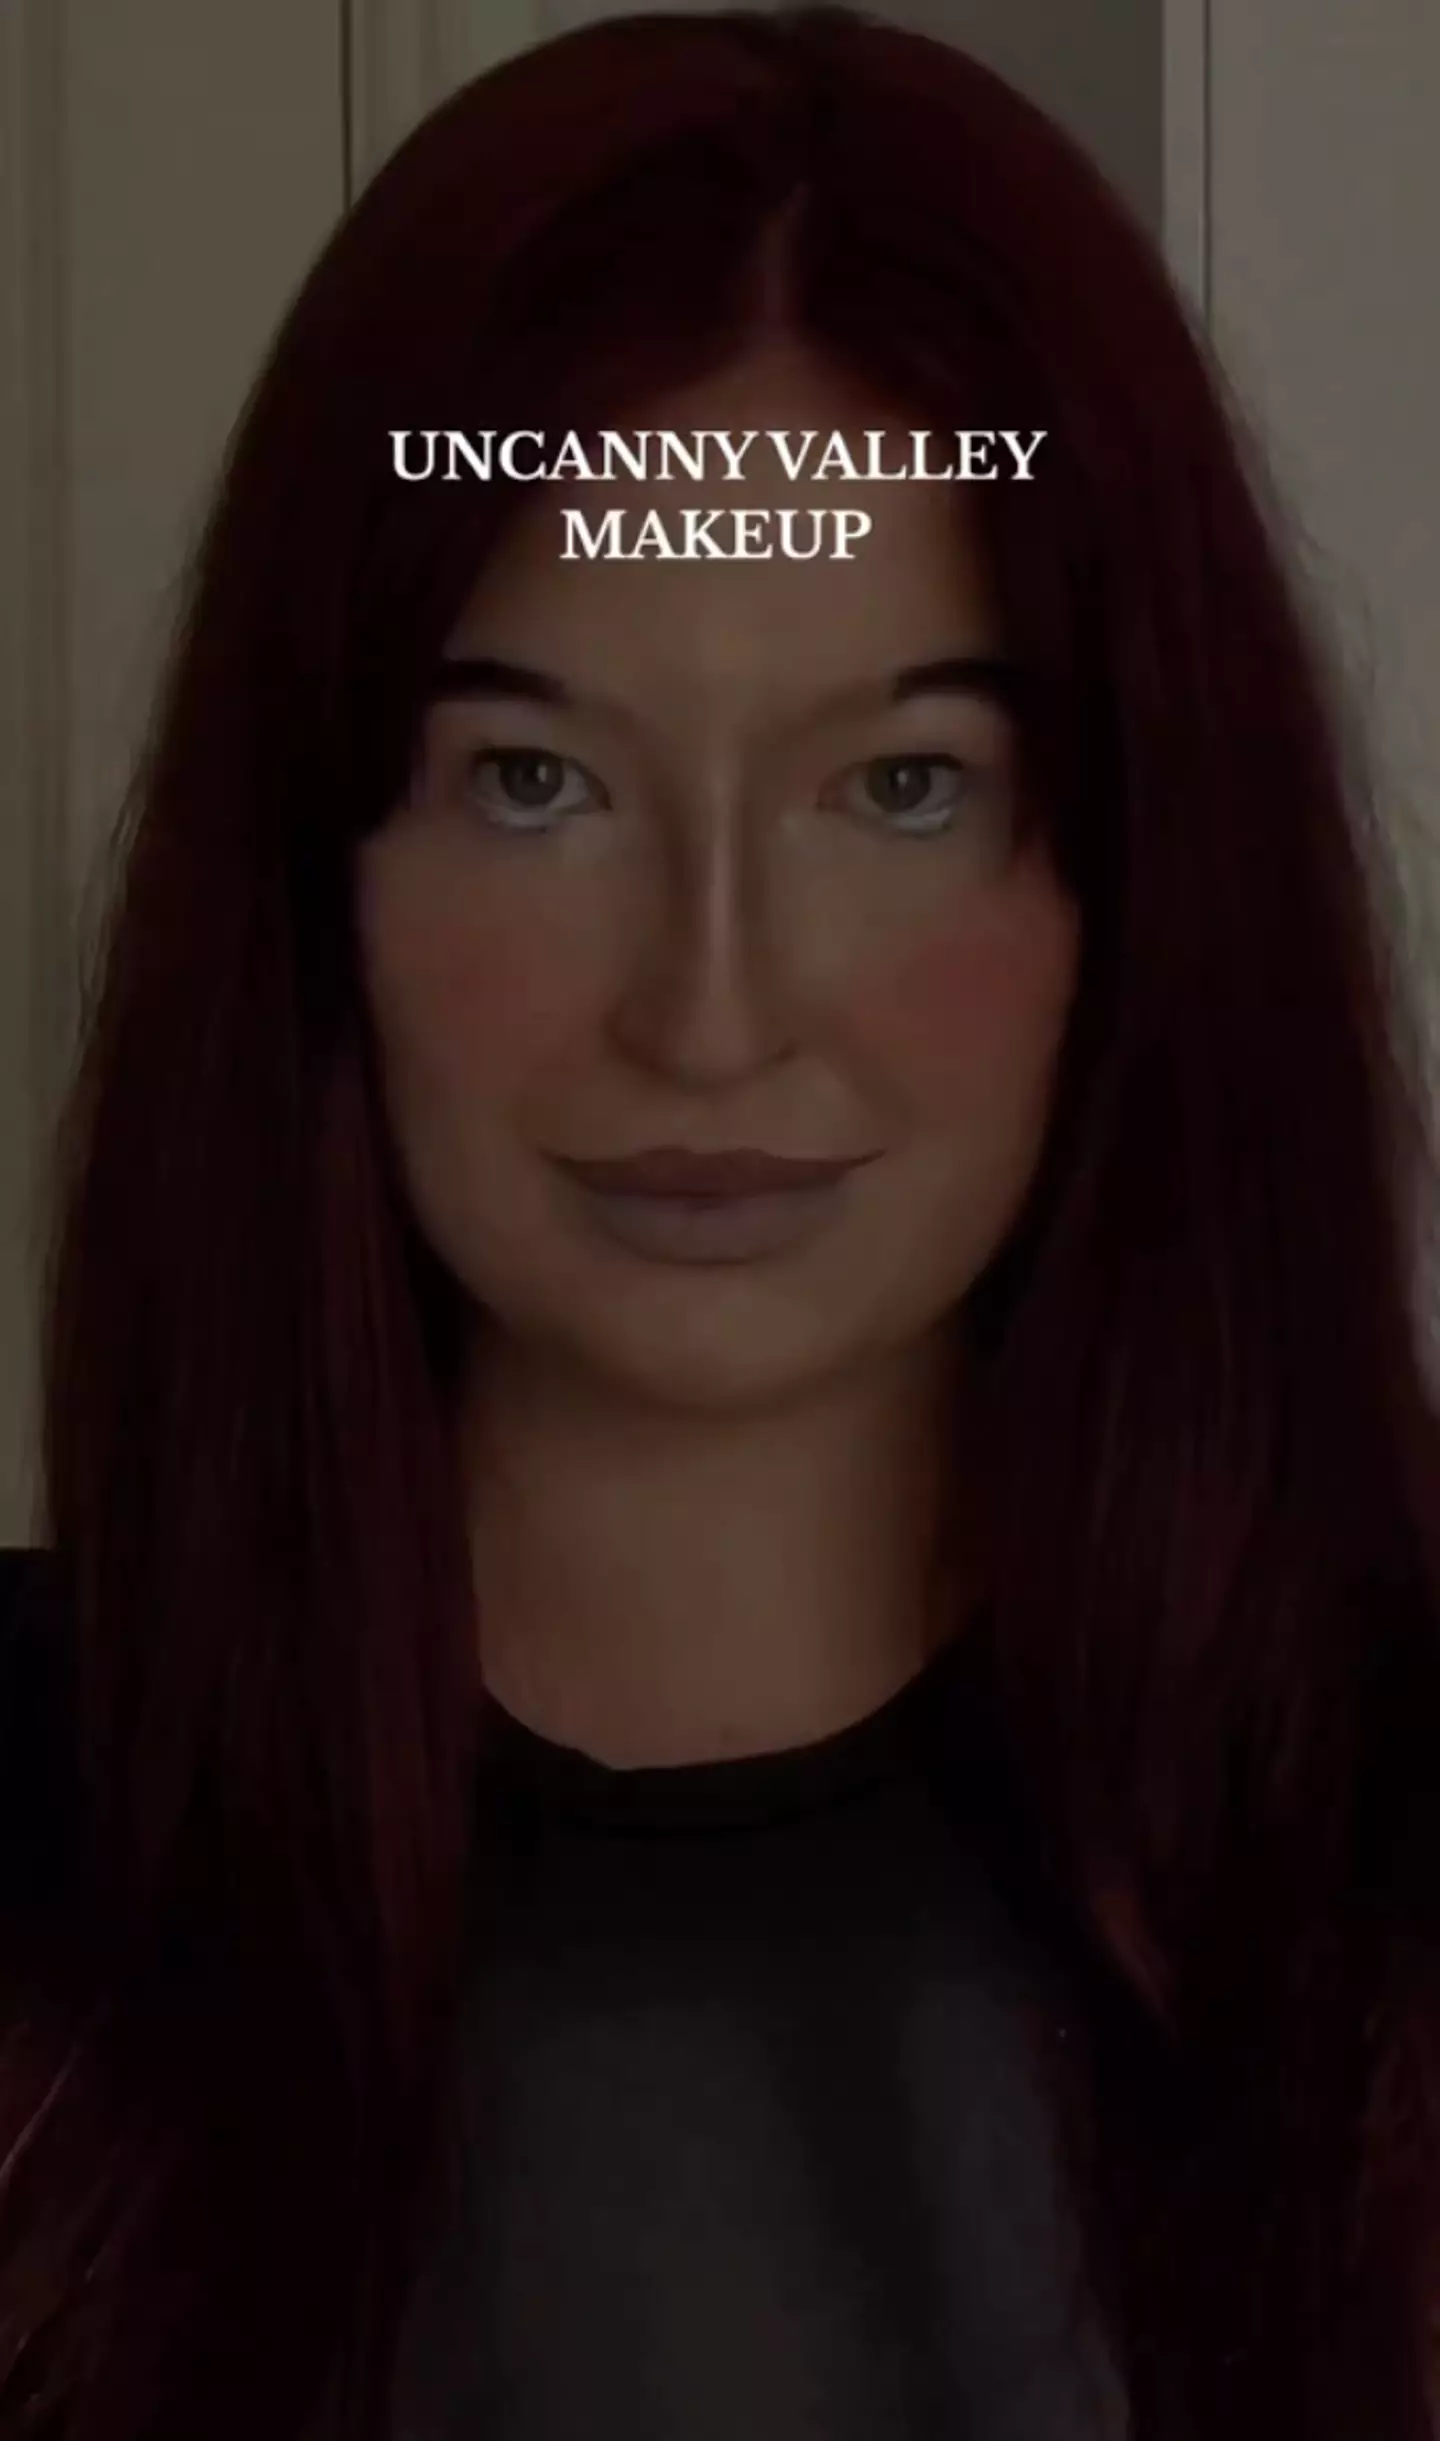 Meg has since uploaded several more 'uncanny valley' videos to Instagram.